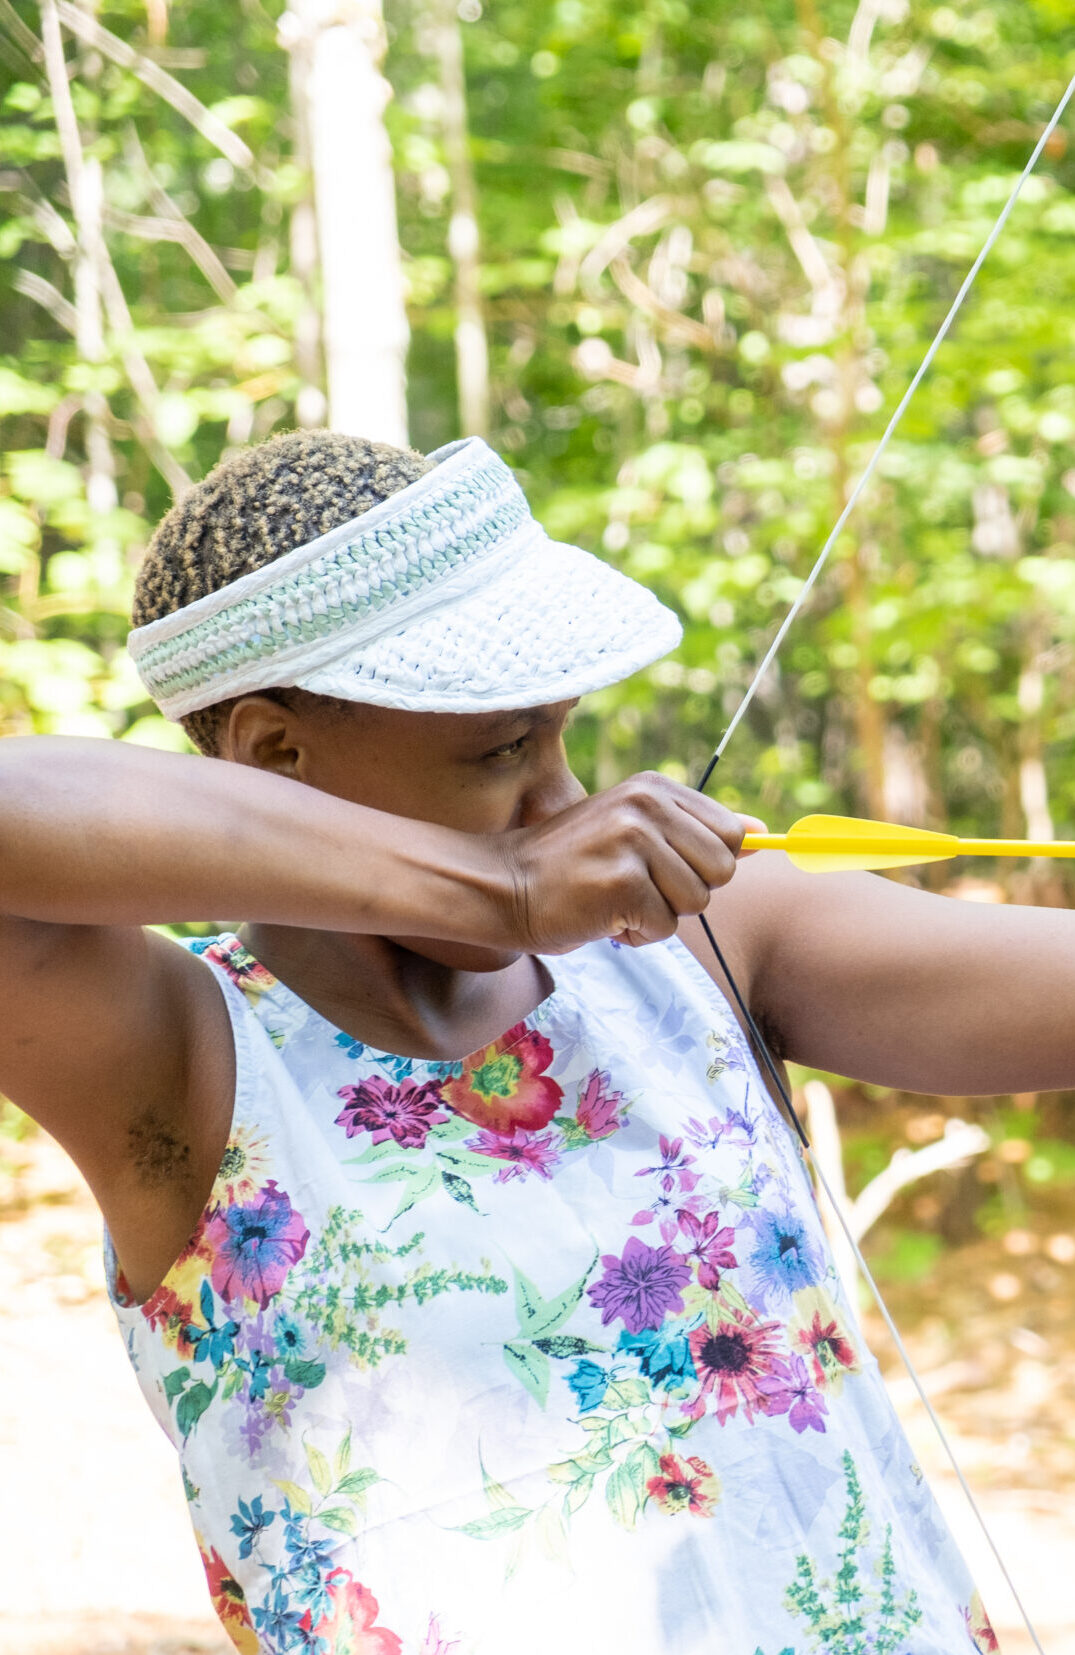 A child at Camp Hale is learning archery